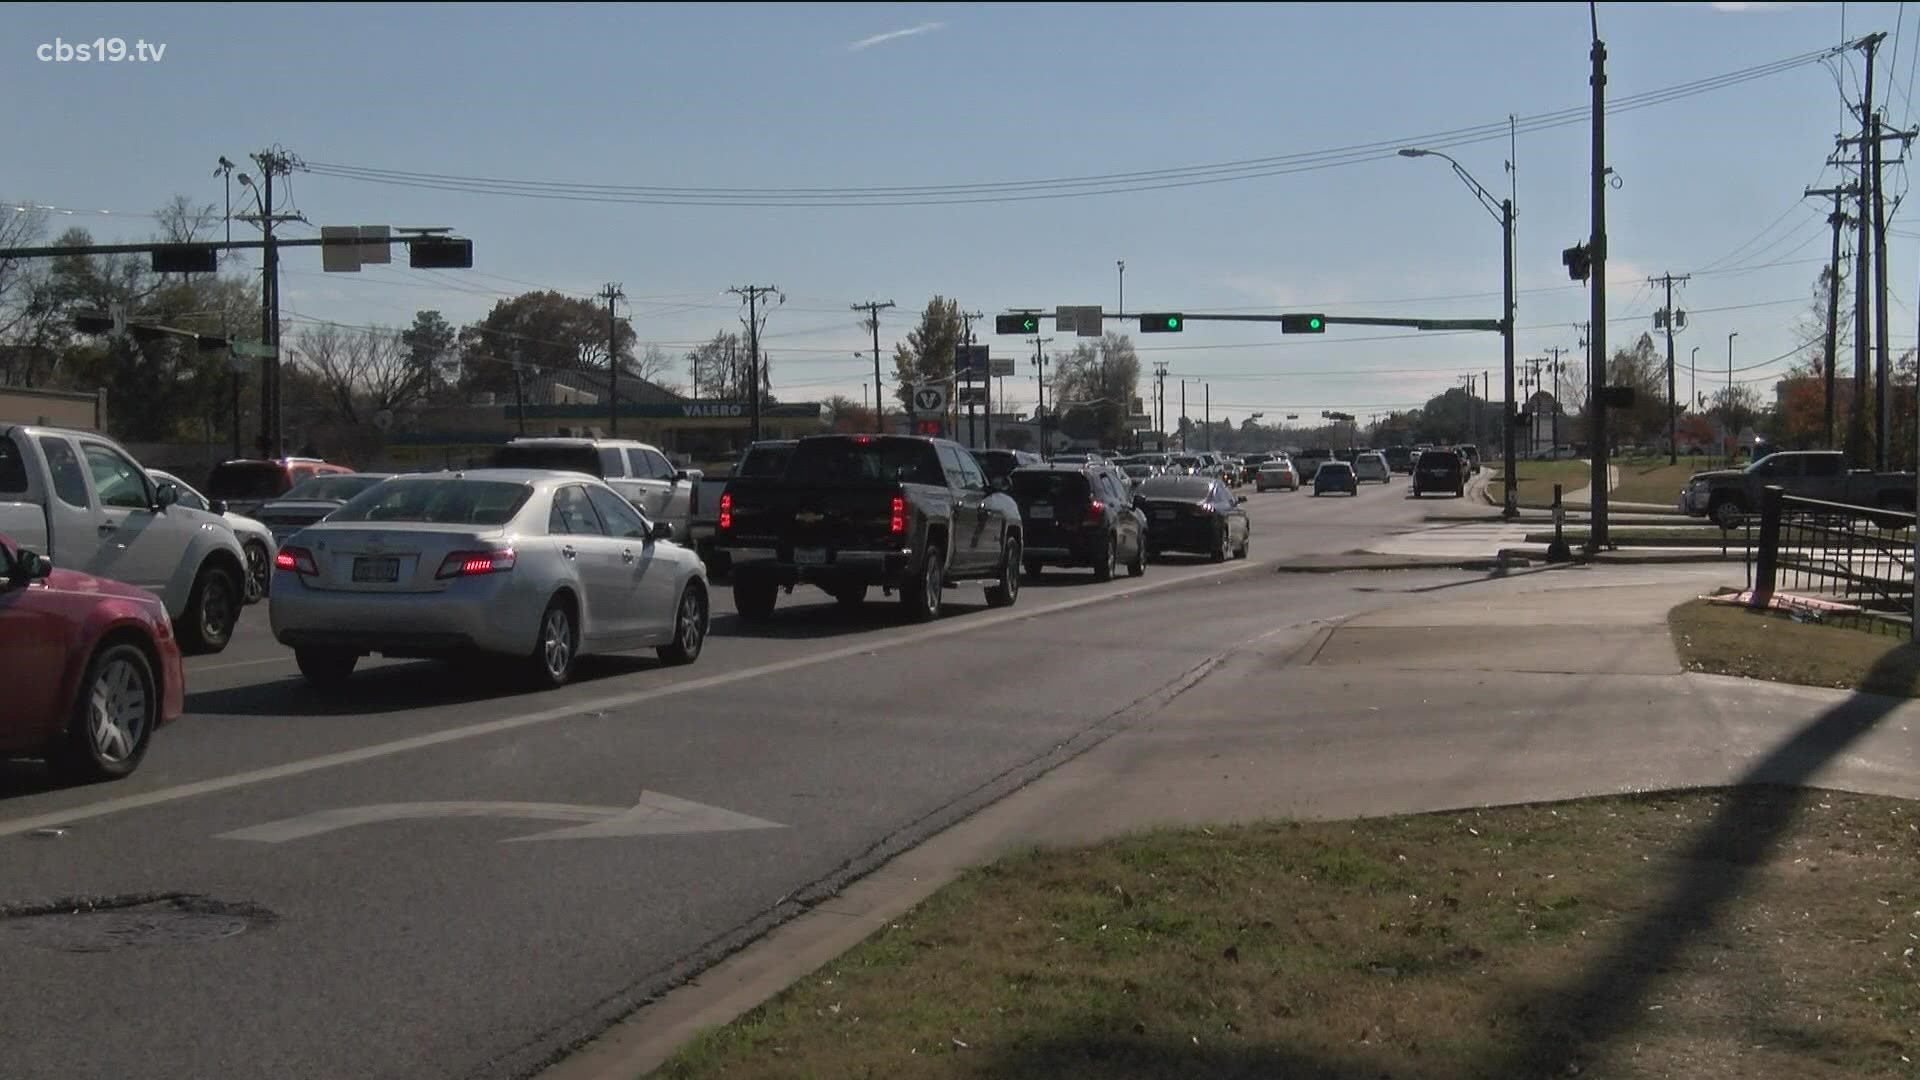 A new $2 million system will be implemented to help improve traffic flow by allowing traffic lights to communicate with each other.